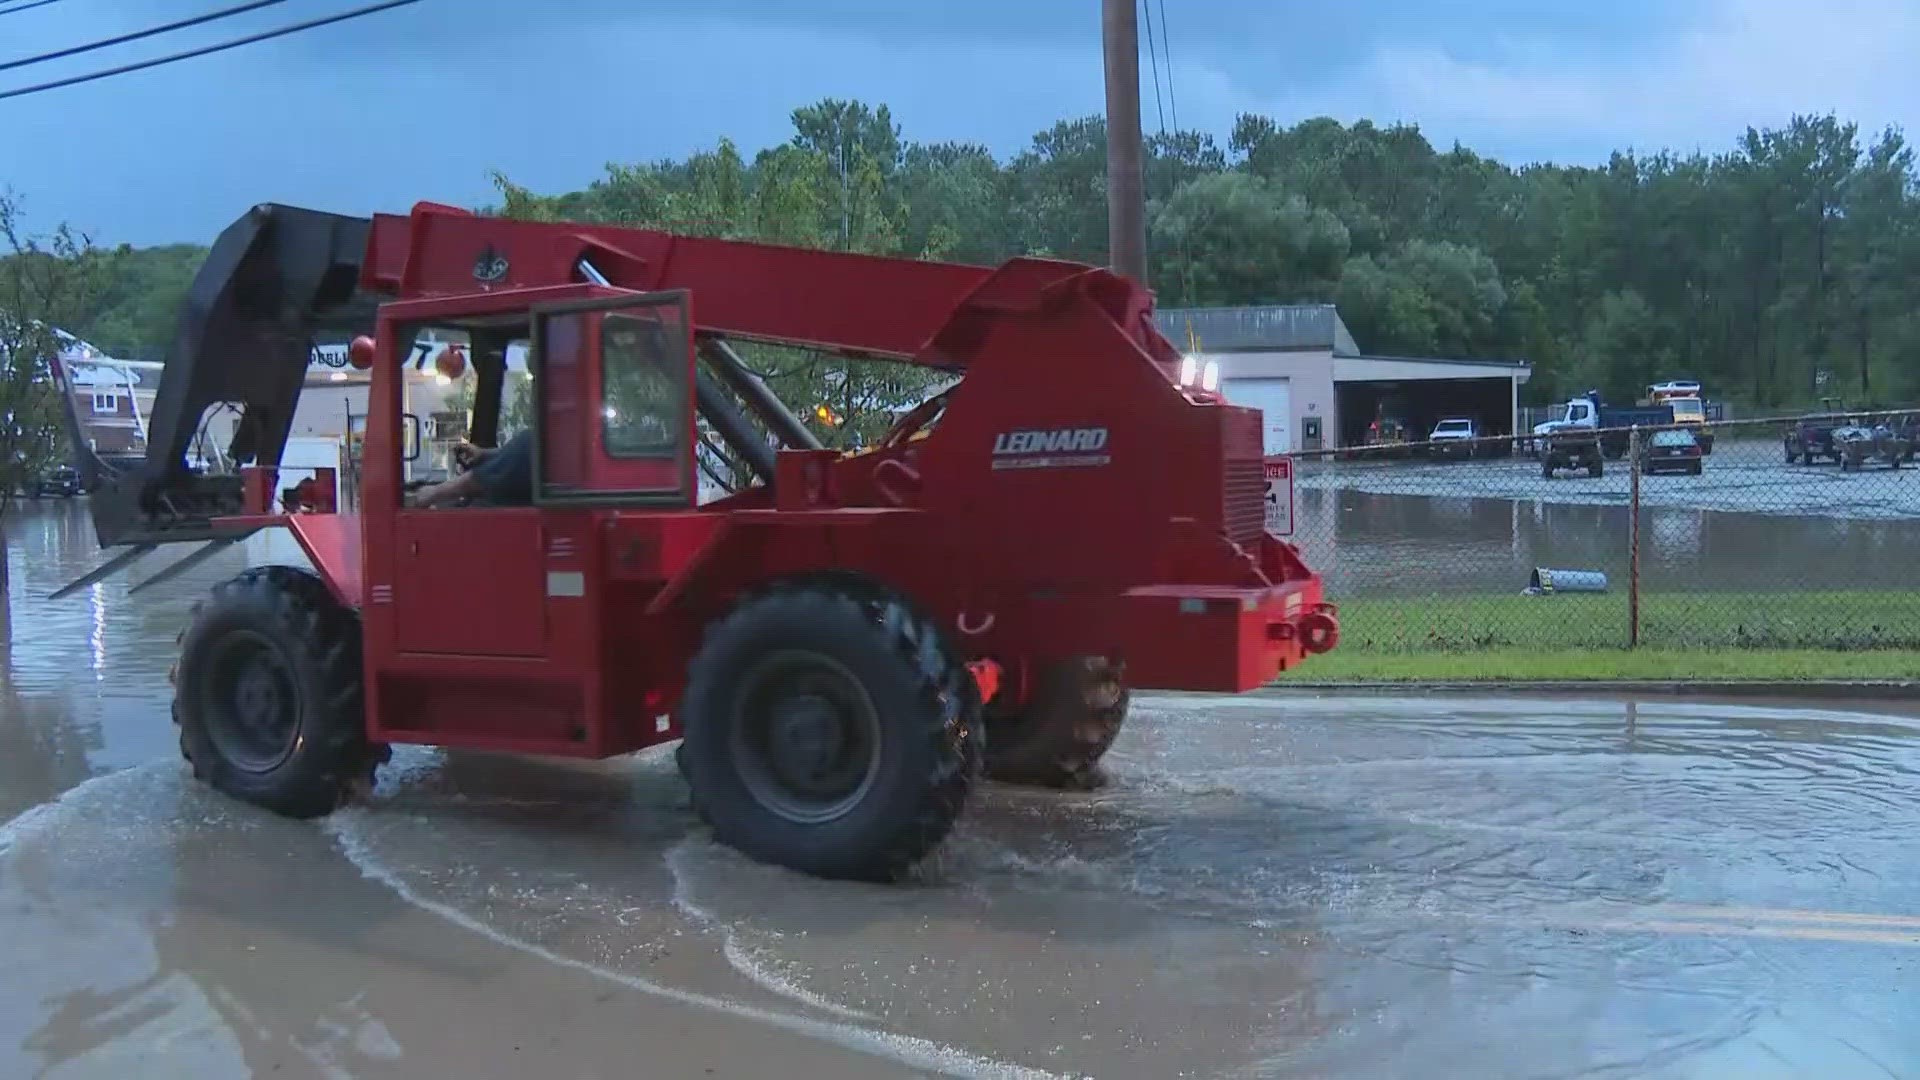 Crews in Auburn worked to respond to several calls for service amid flash flooding, police said.